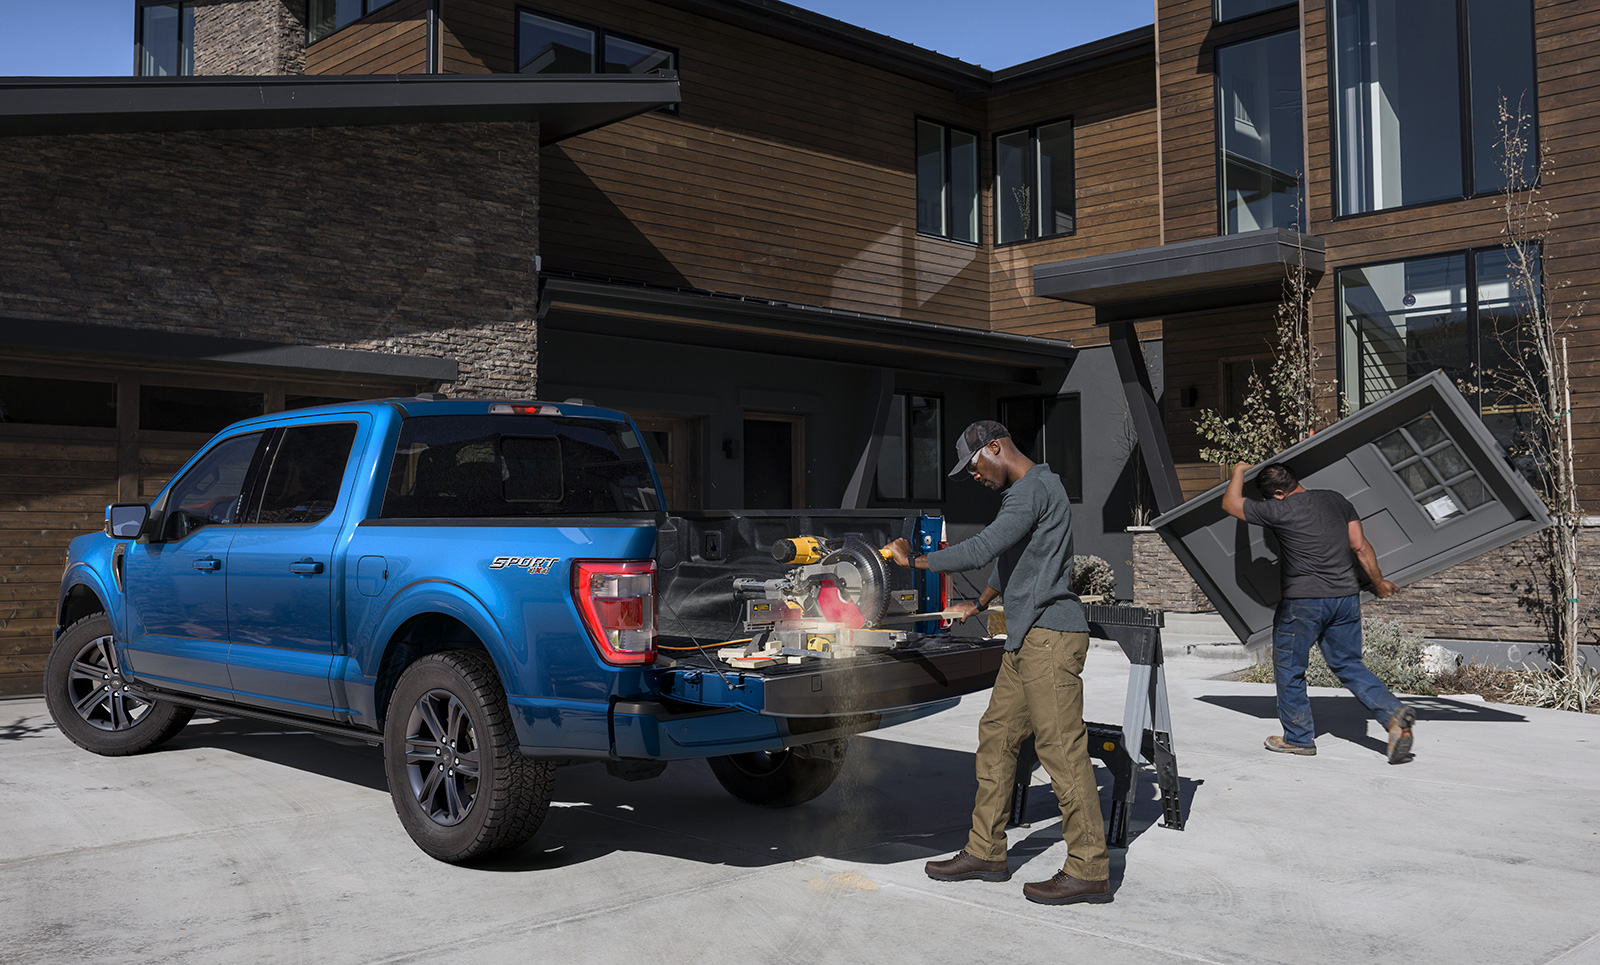 Ford's "Pro Power Onboard" system provides up to 7.2 kilowatts of power directly from an F-150.